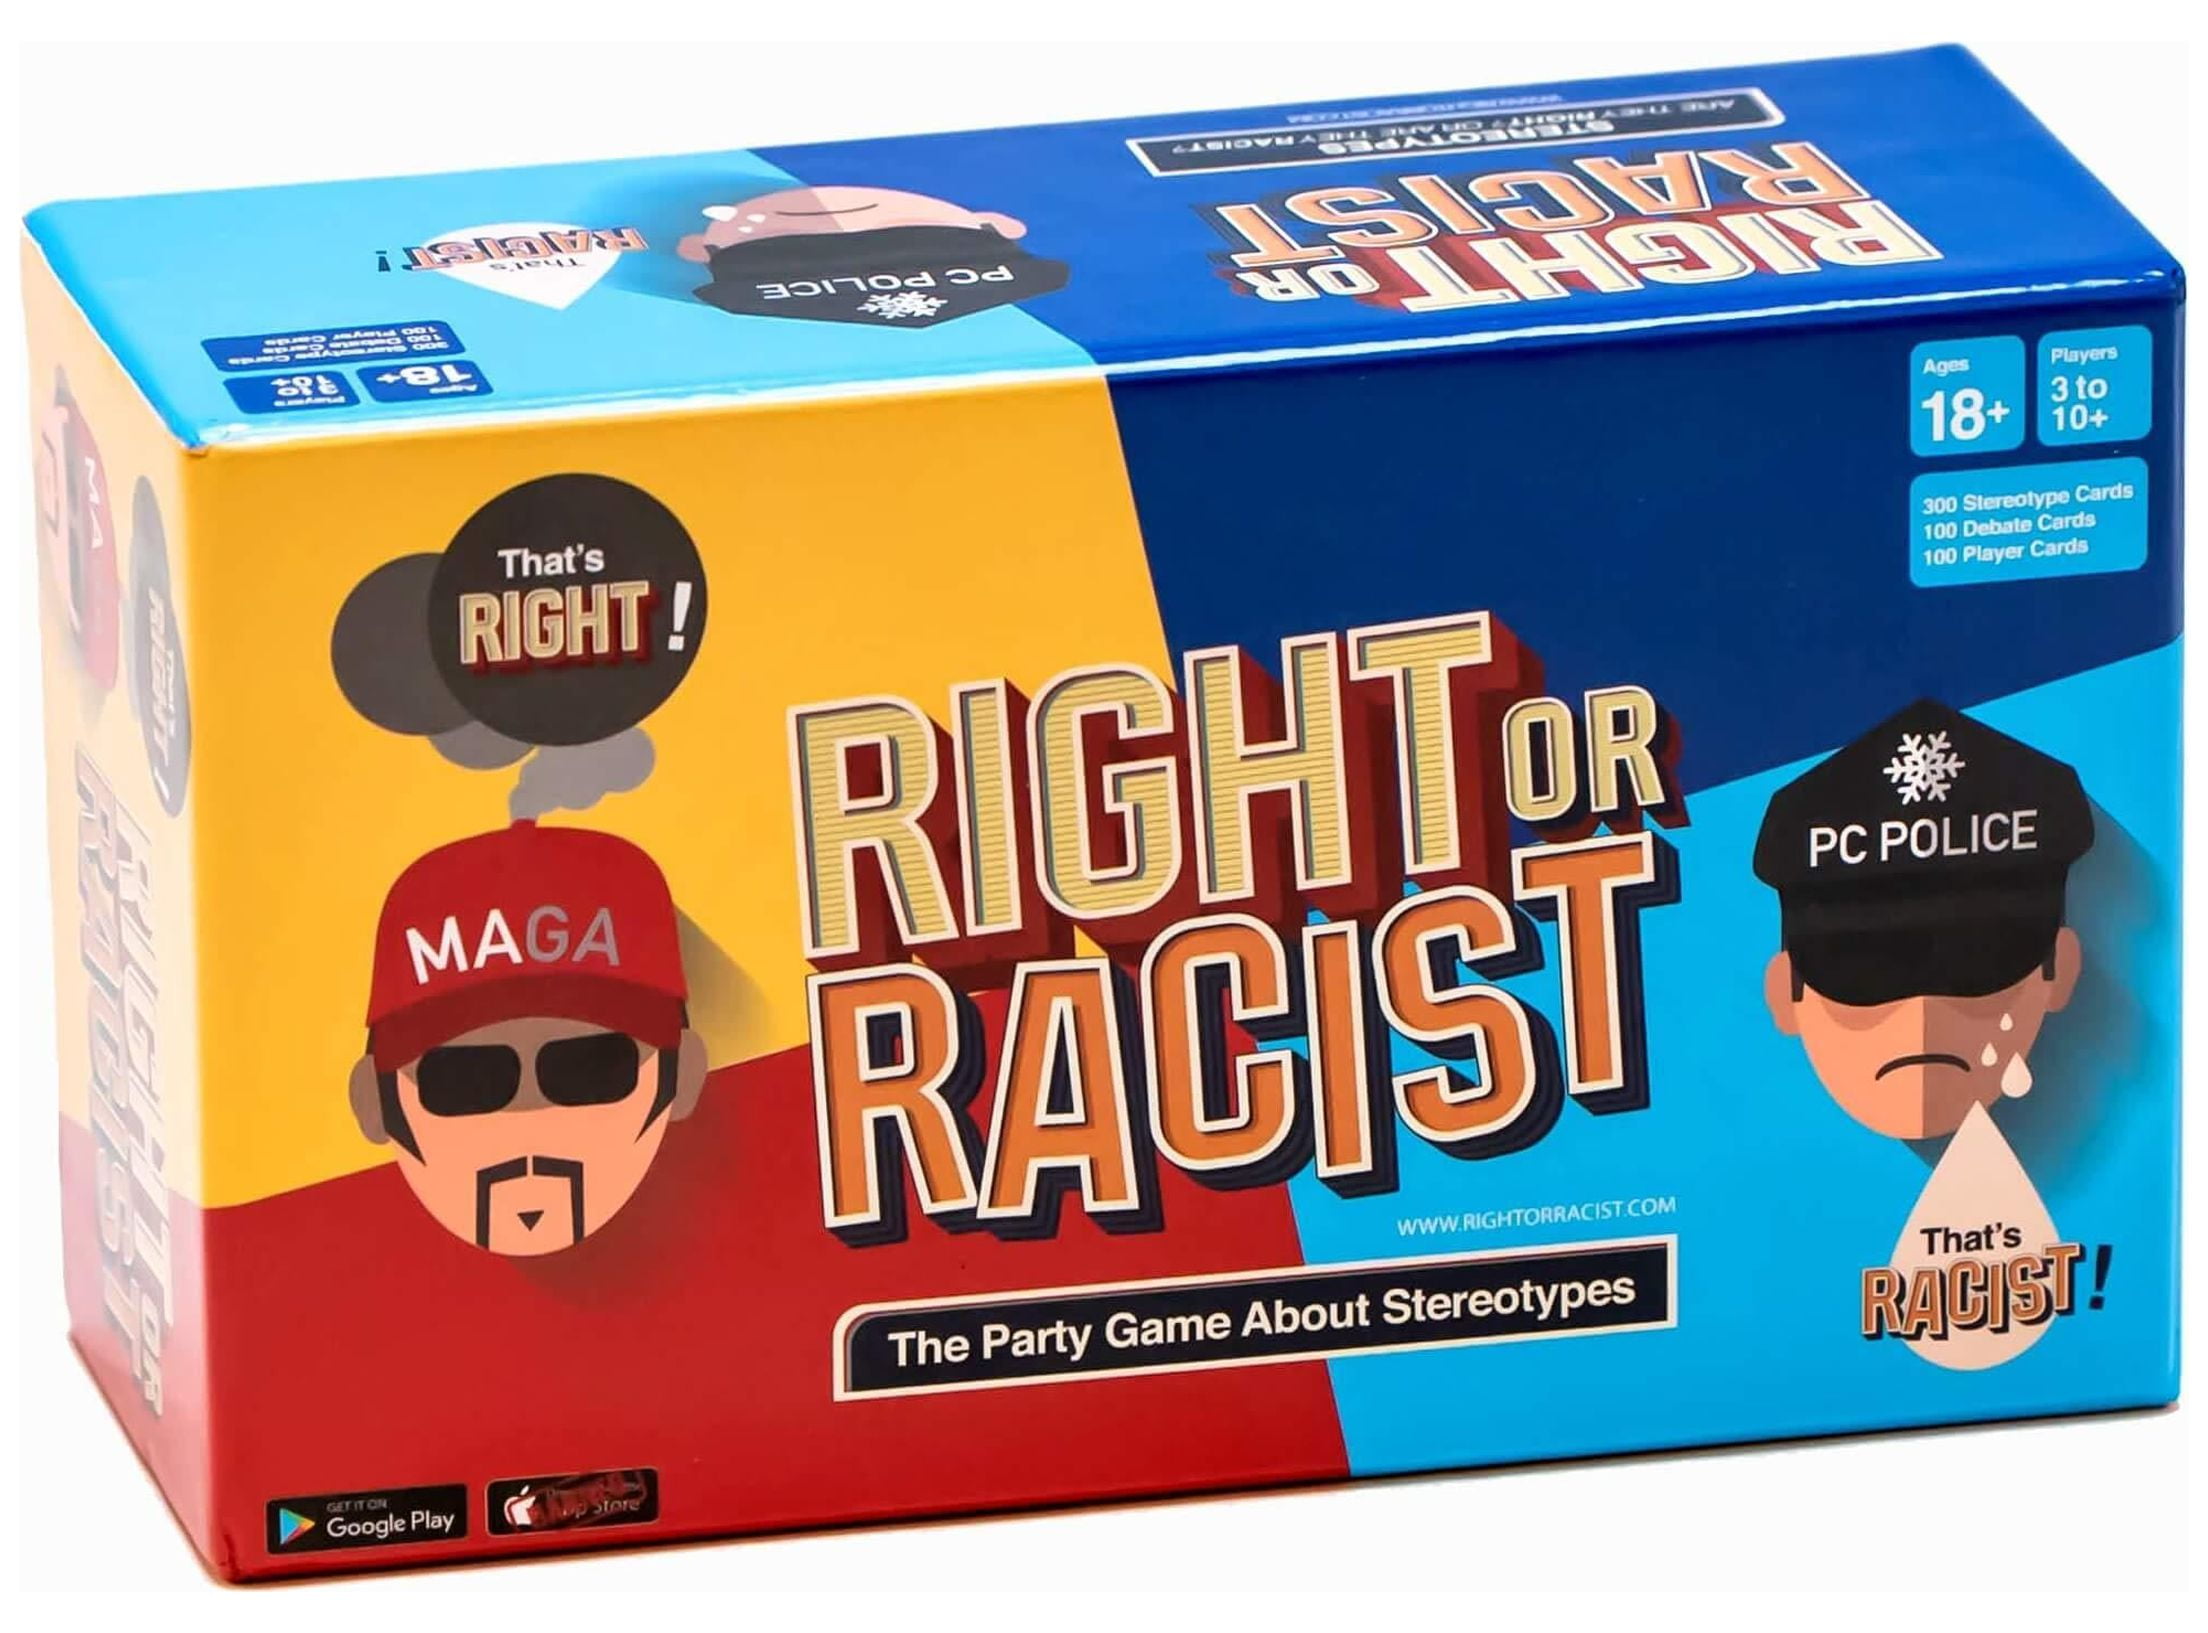 Right or Racist - Funny White Elephant Gifts - Xmas Gag Gift - Adult Party  Game